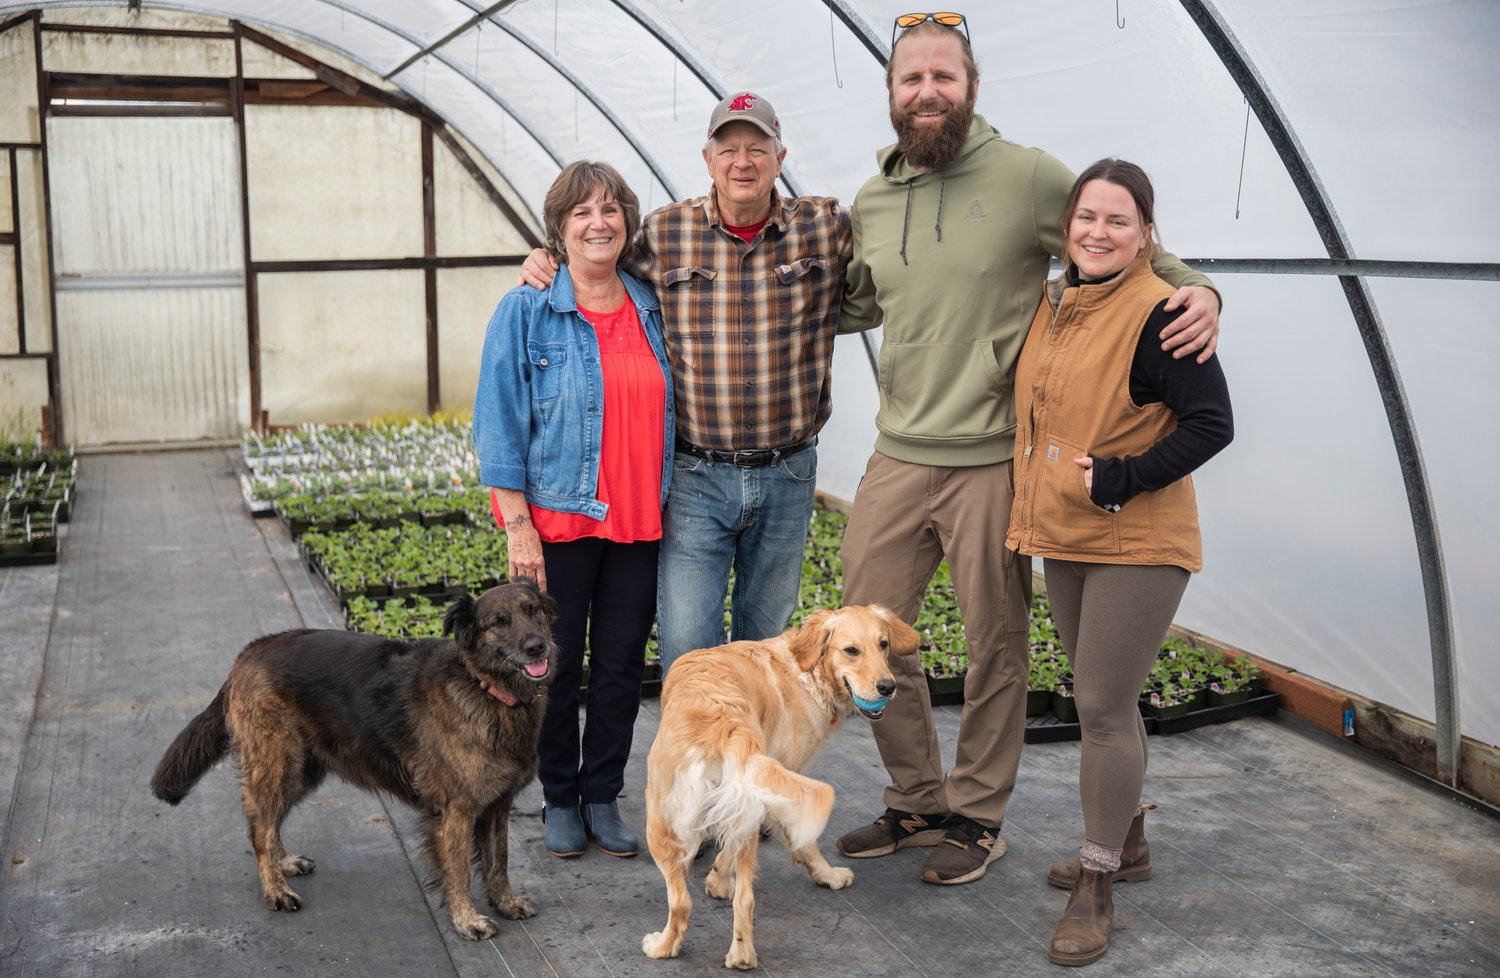 Connie and Spencer Davis pose for a photo alongside Kyle and Jena Aselton and their dogs Birdy and Willow at the Dirty Thumb Nursery along state Route 6 near Adna.